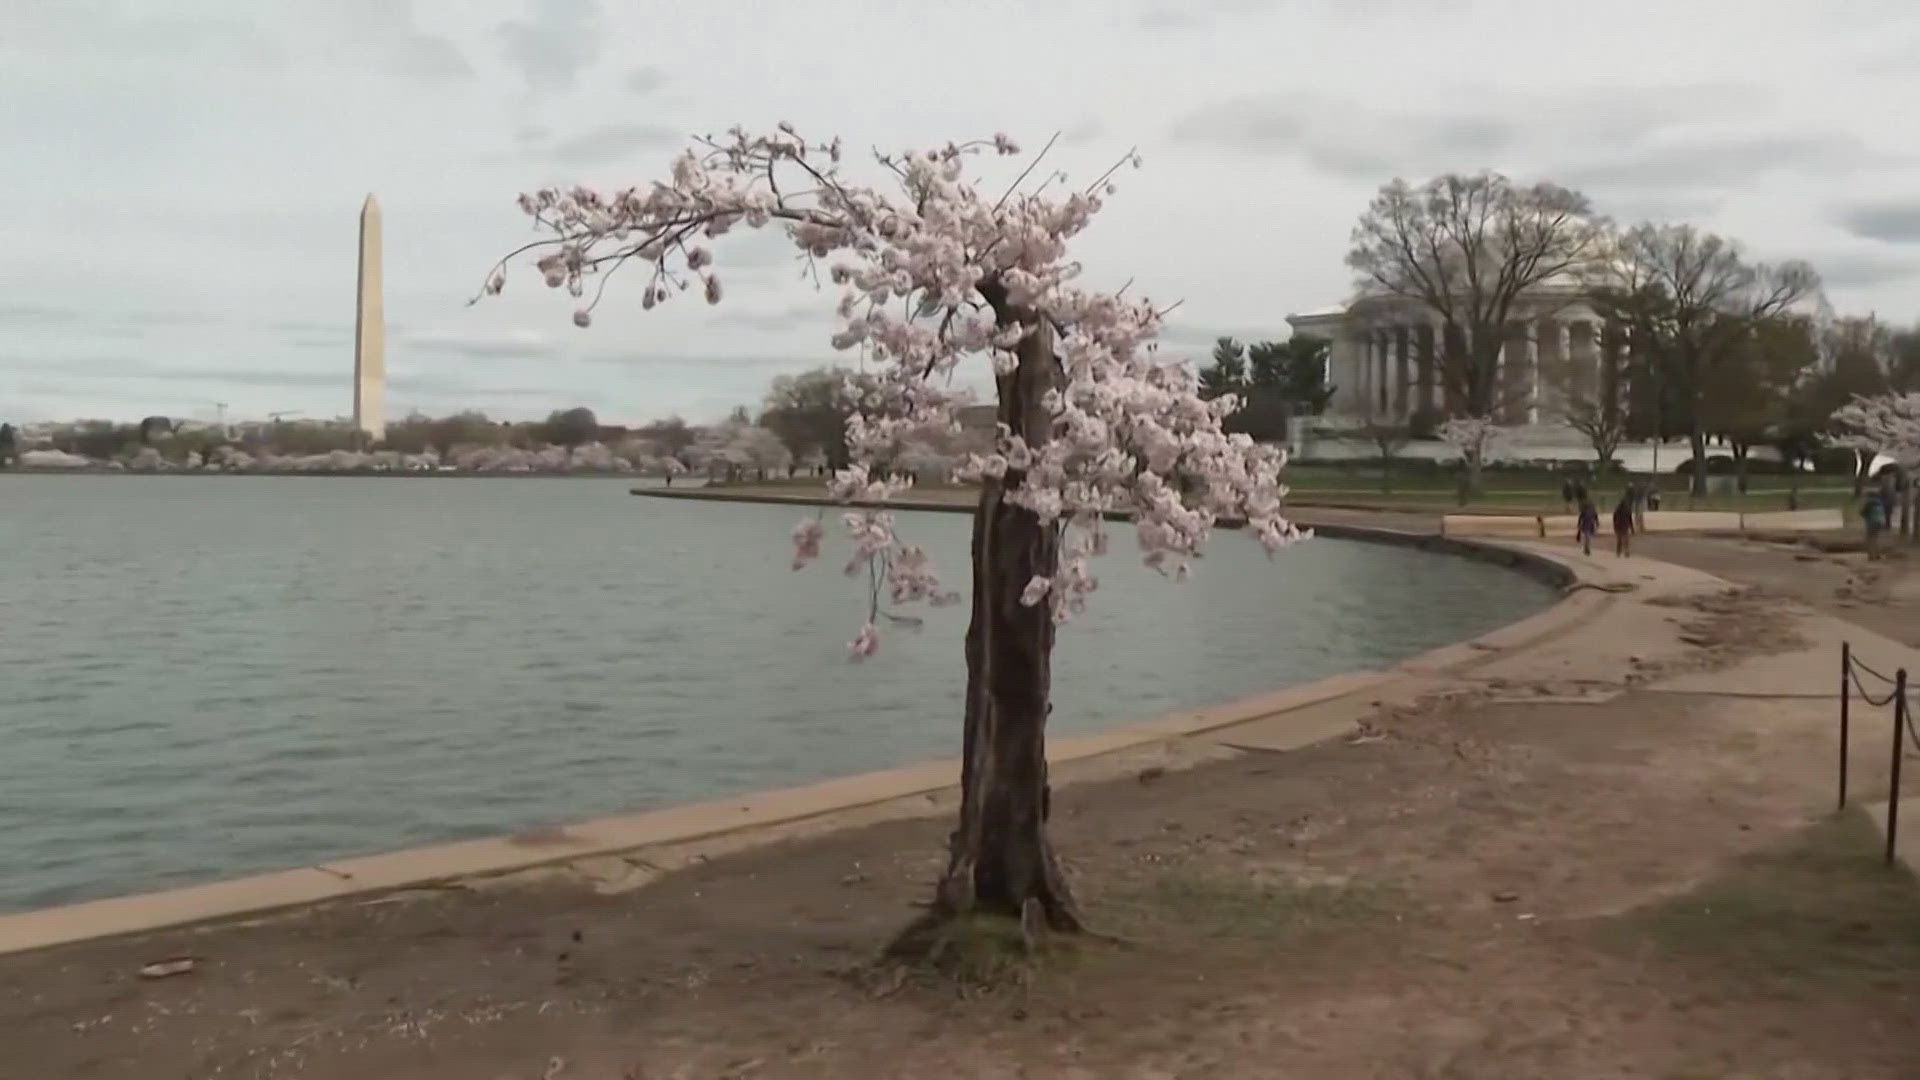 Stumpy is one of 140 cherry trees the National Park Service is removing as part of a plan to repair the sinking seawall.